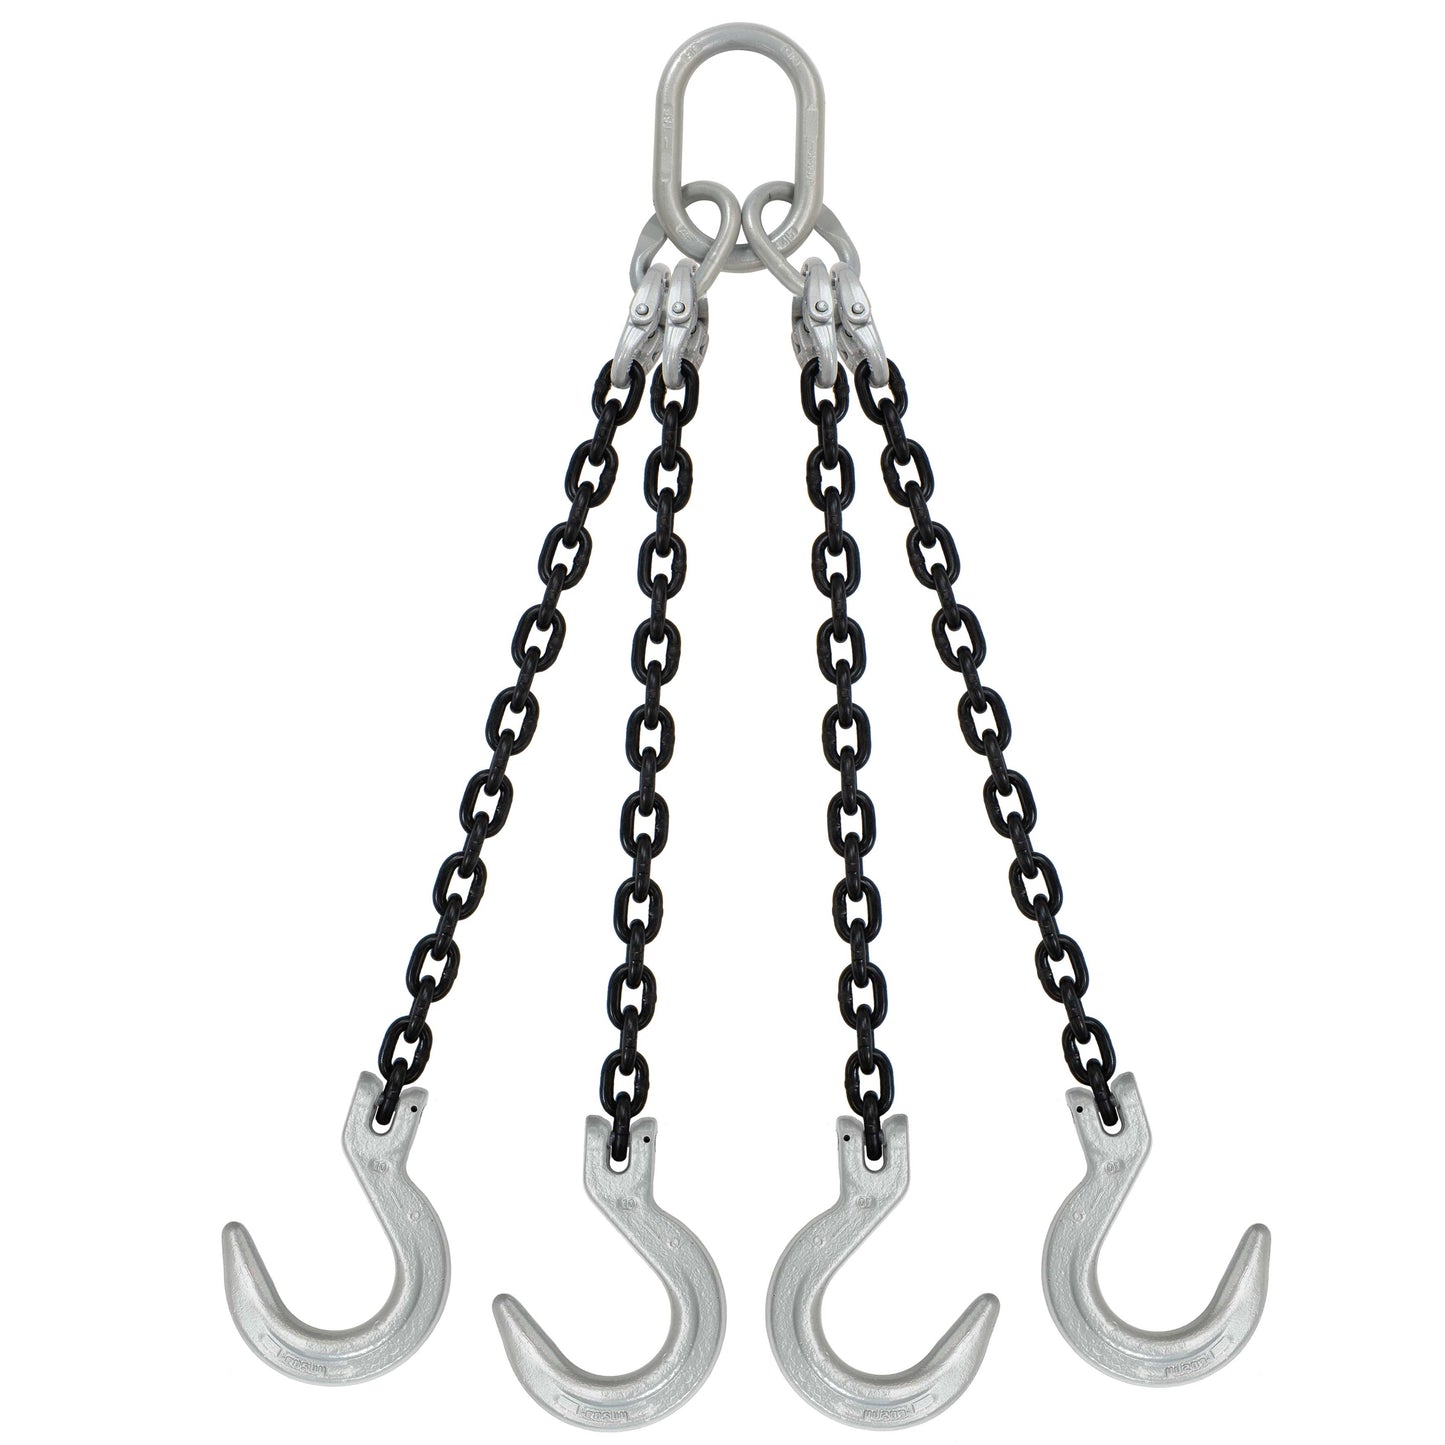 932 inch x 10 foot Domestic 4 Leg Chain Sling w Crosby Foundry Hooks Grade 100 image 1 of 2